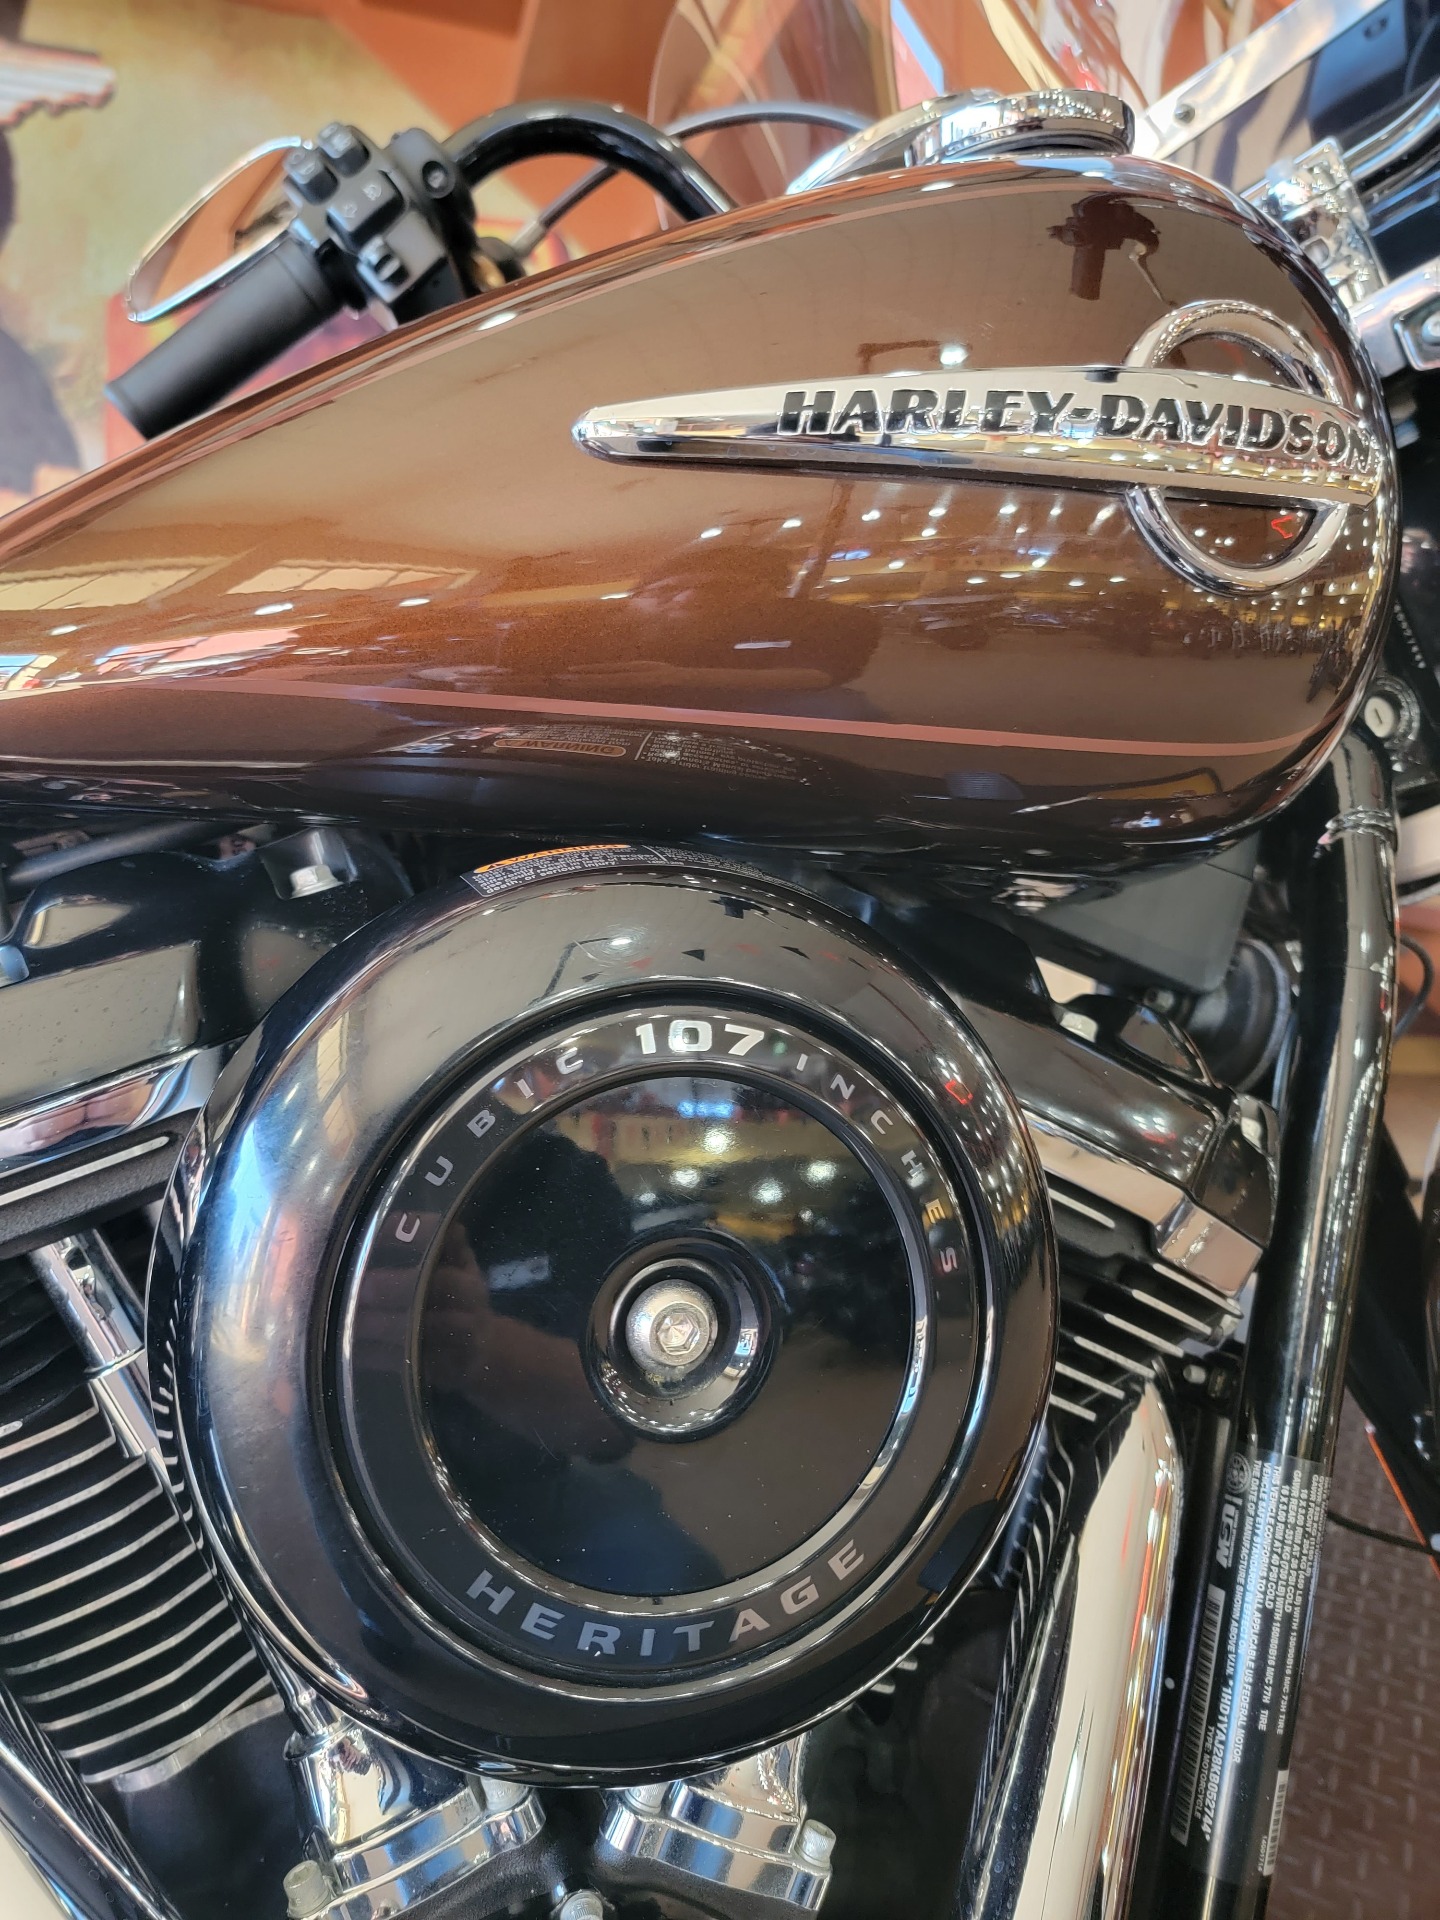 2019 Harley-Davidson Heritage Classic 107 in Knoxville, Tennessee - Photo 6